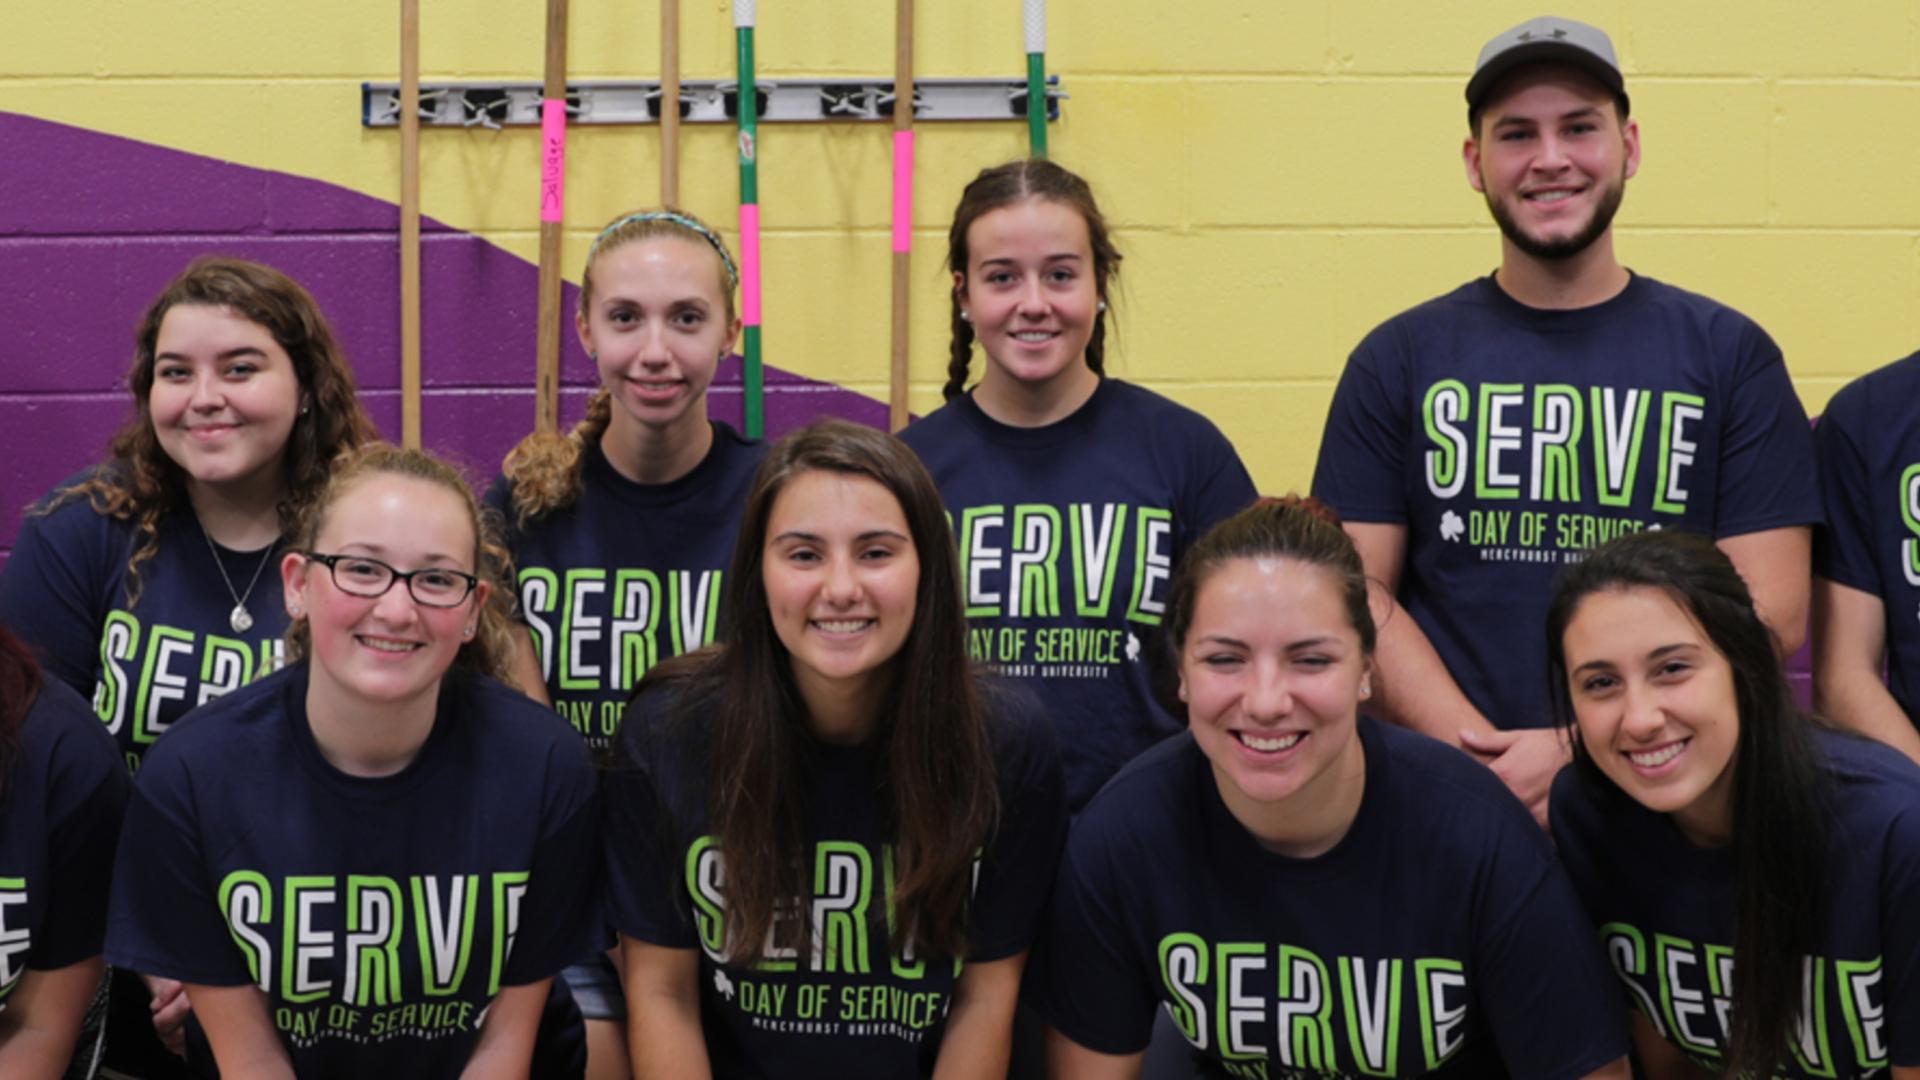 Students posing in Service T-Shirts